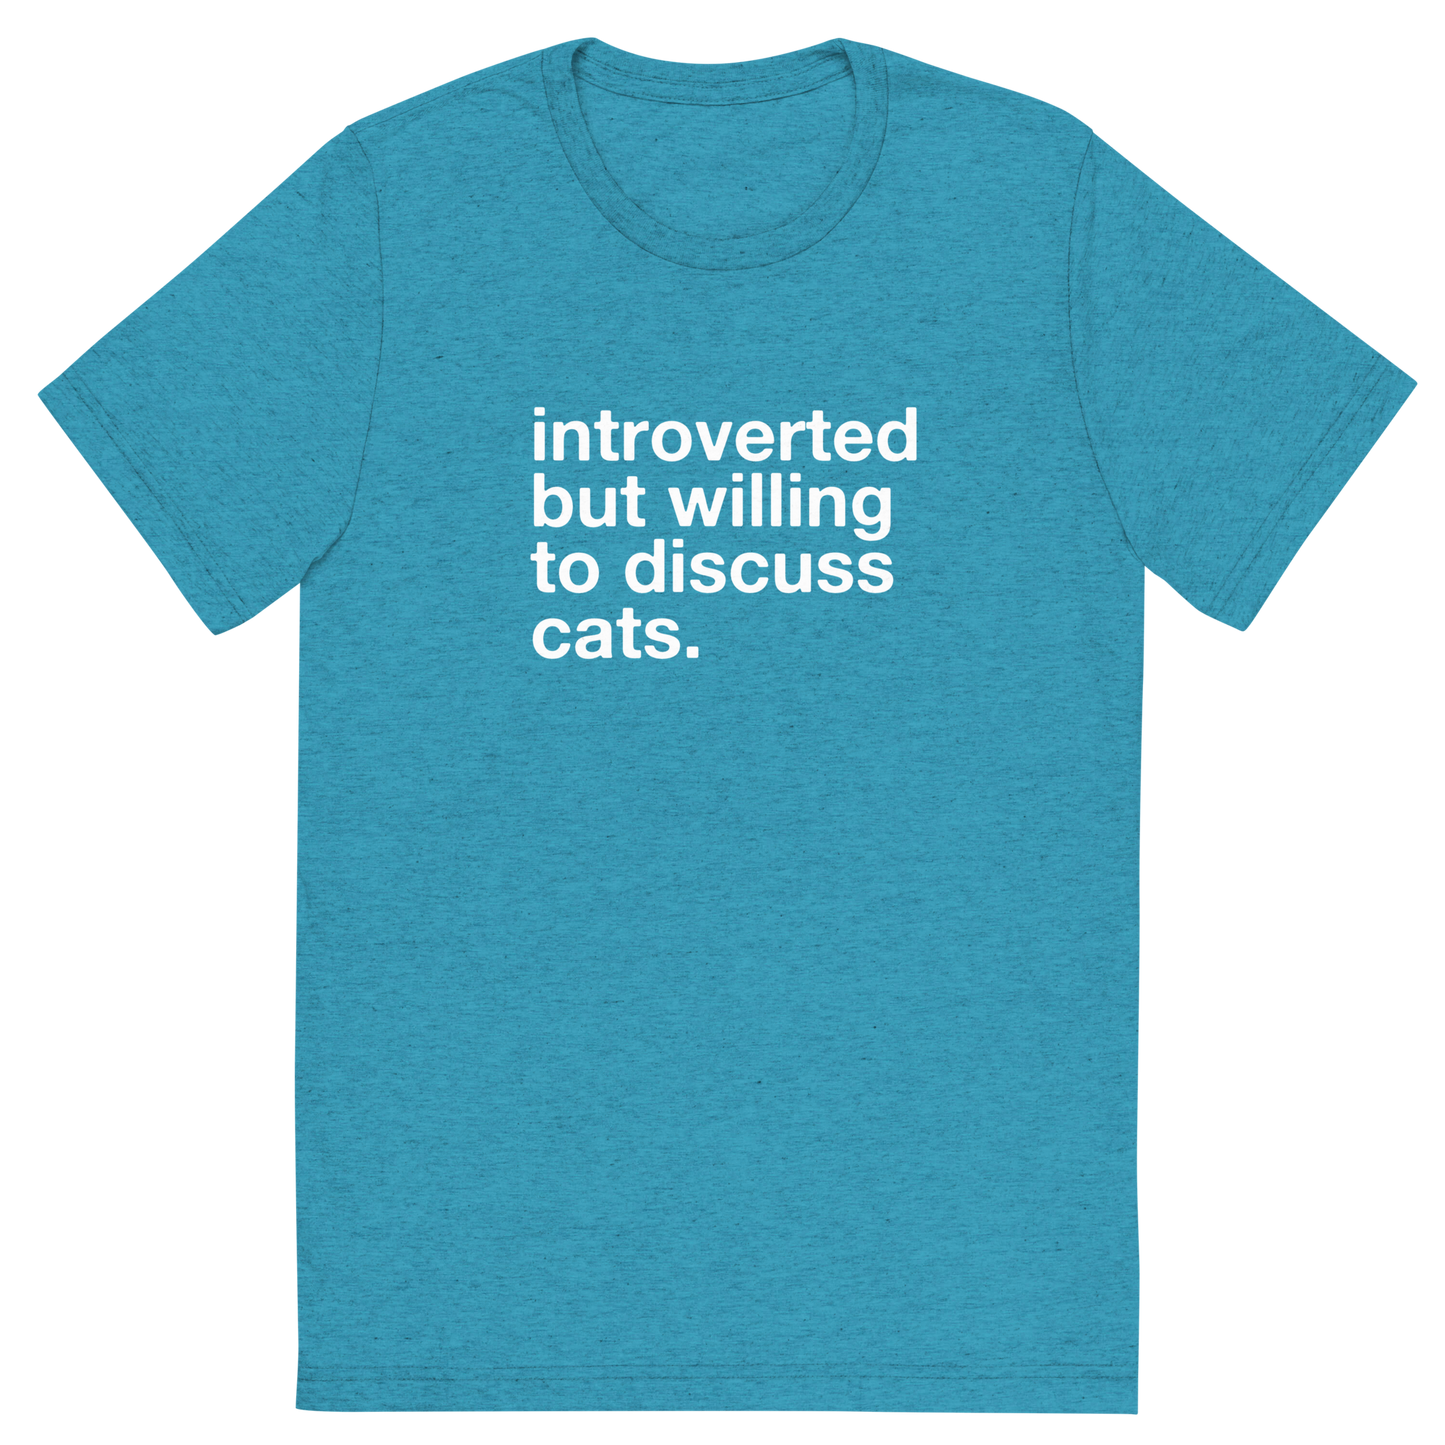 introverted but willing to discuss cats. - Unisex Triblend Tee